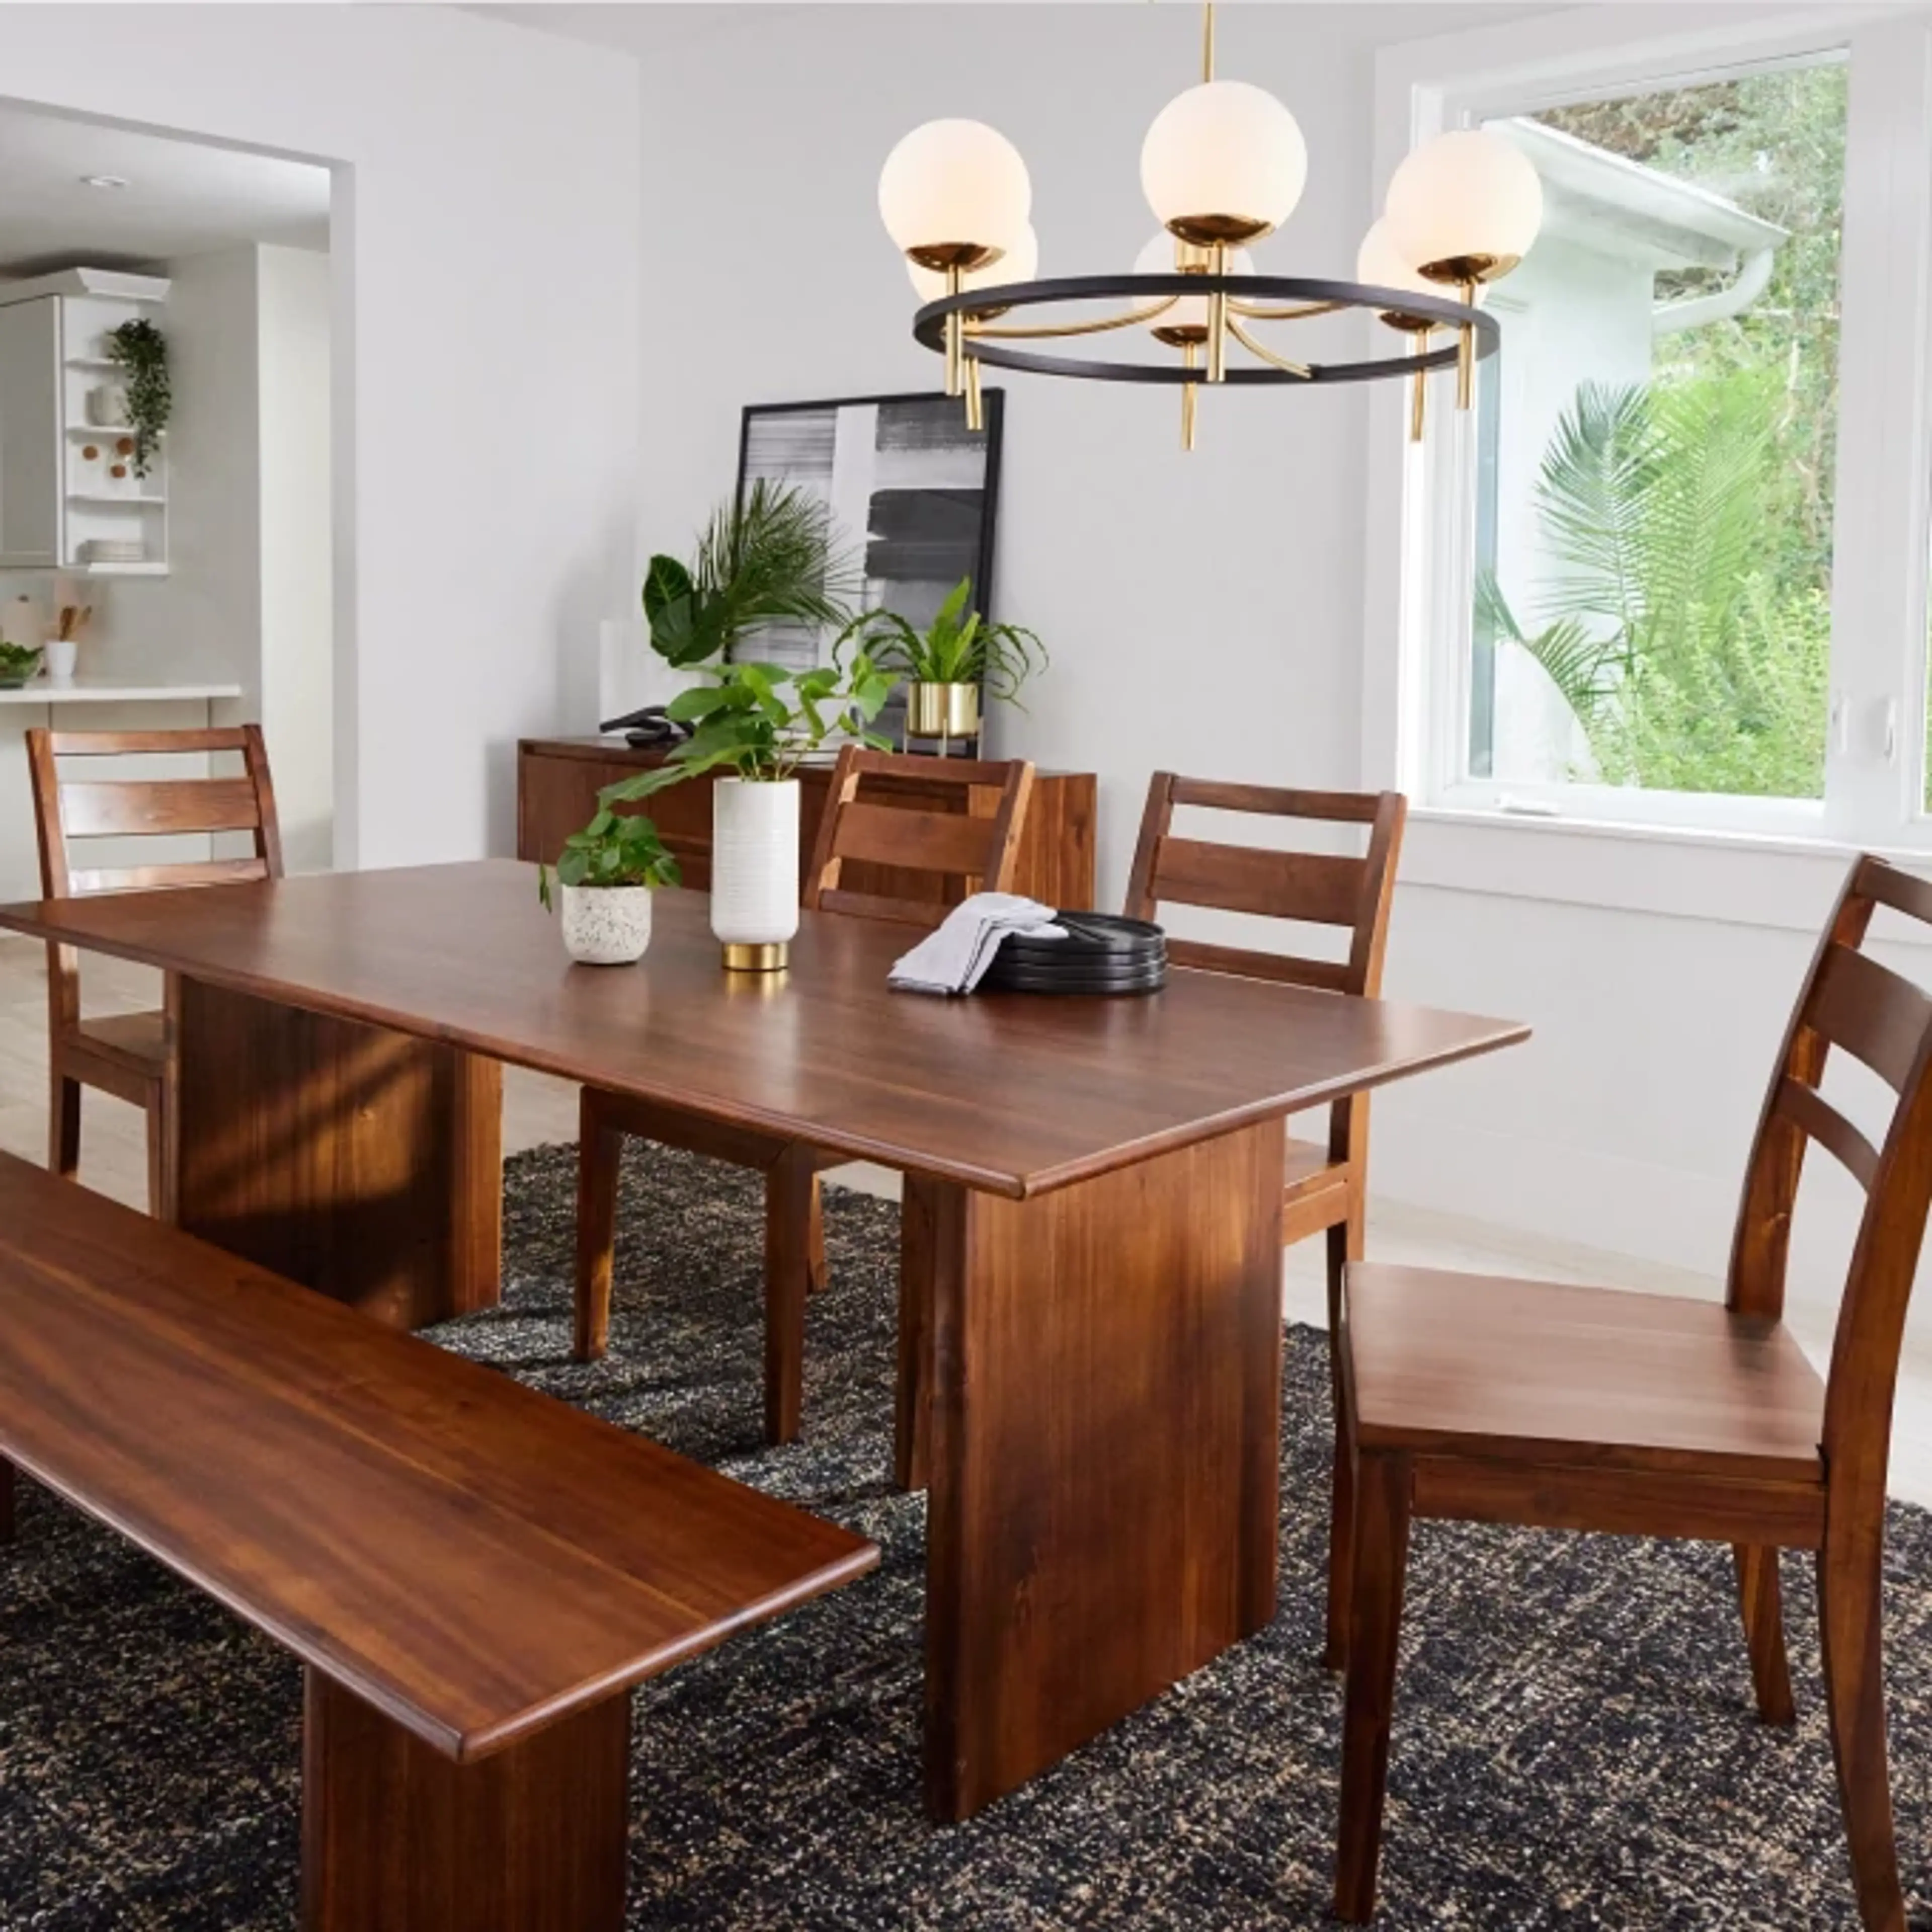 How to Style a Kitchen Table: 4 Tips on Transforming Your Dining Space 